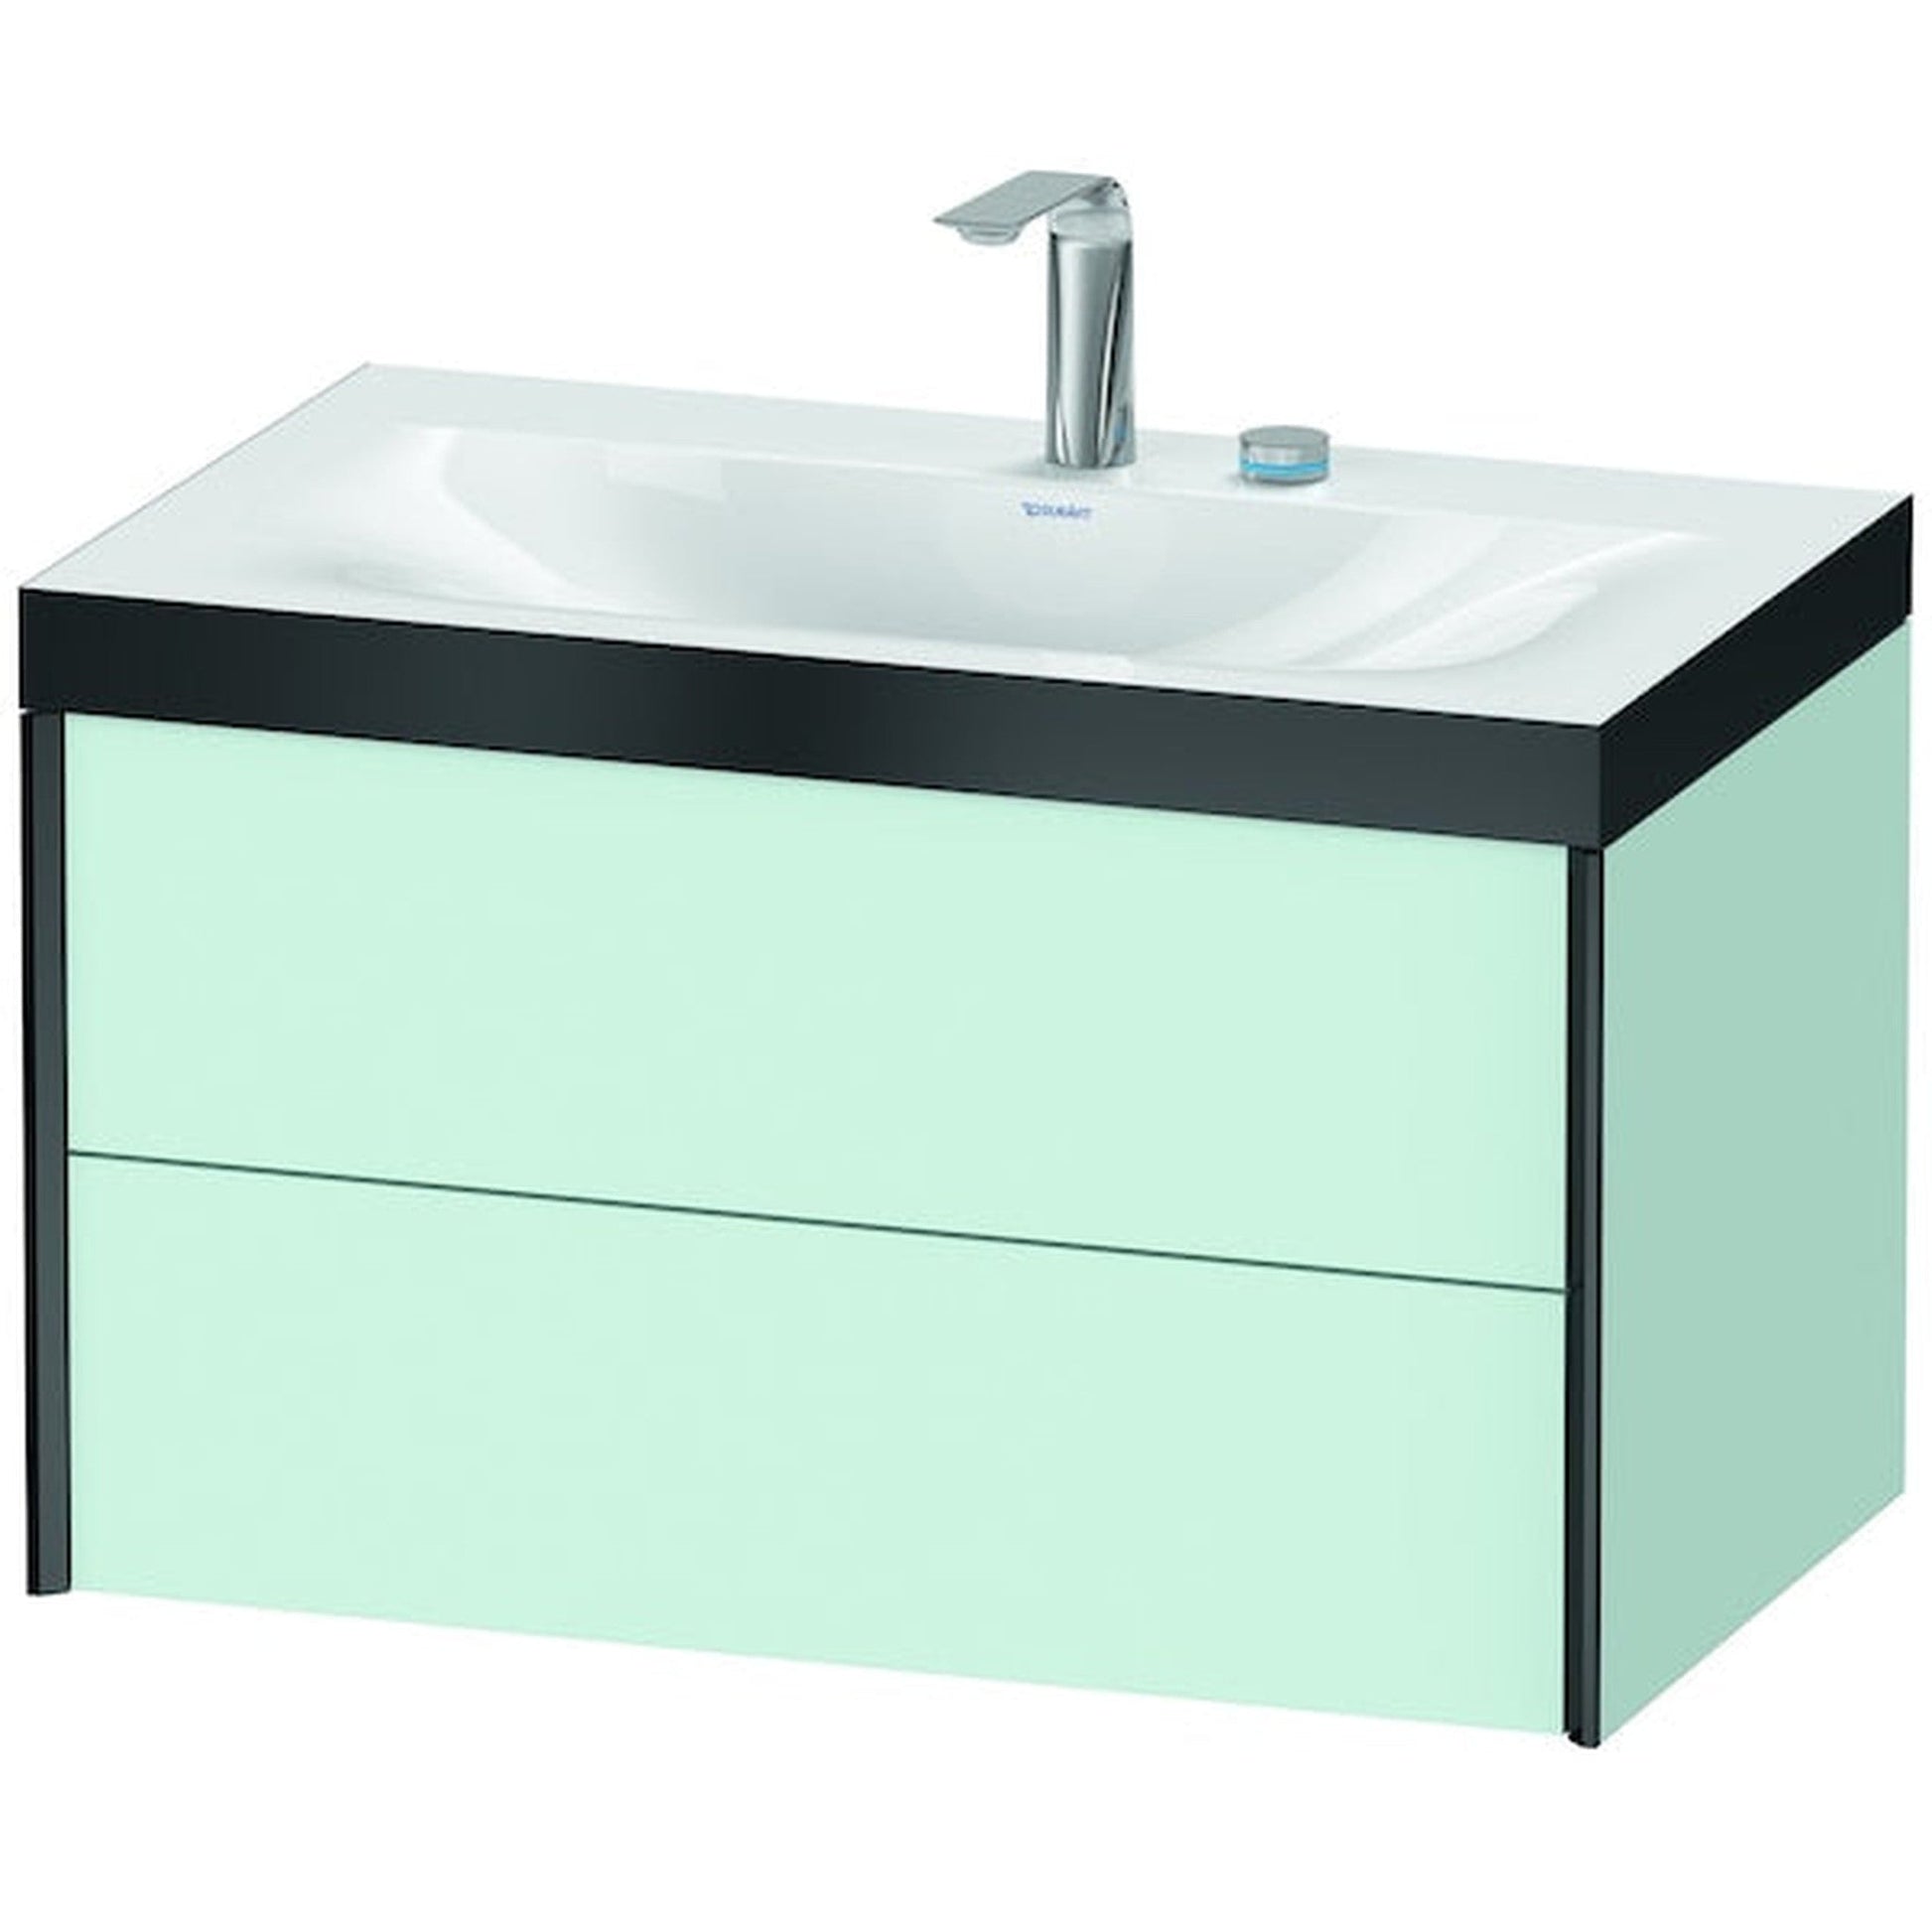 Duravit Xviu 31" x 20" x 19" Two Drawer C-Bonded Wall-Mount Vanity Kit With Two Tap Holes, Light Blue (XV4615EB209P)